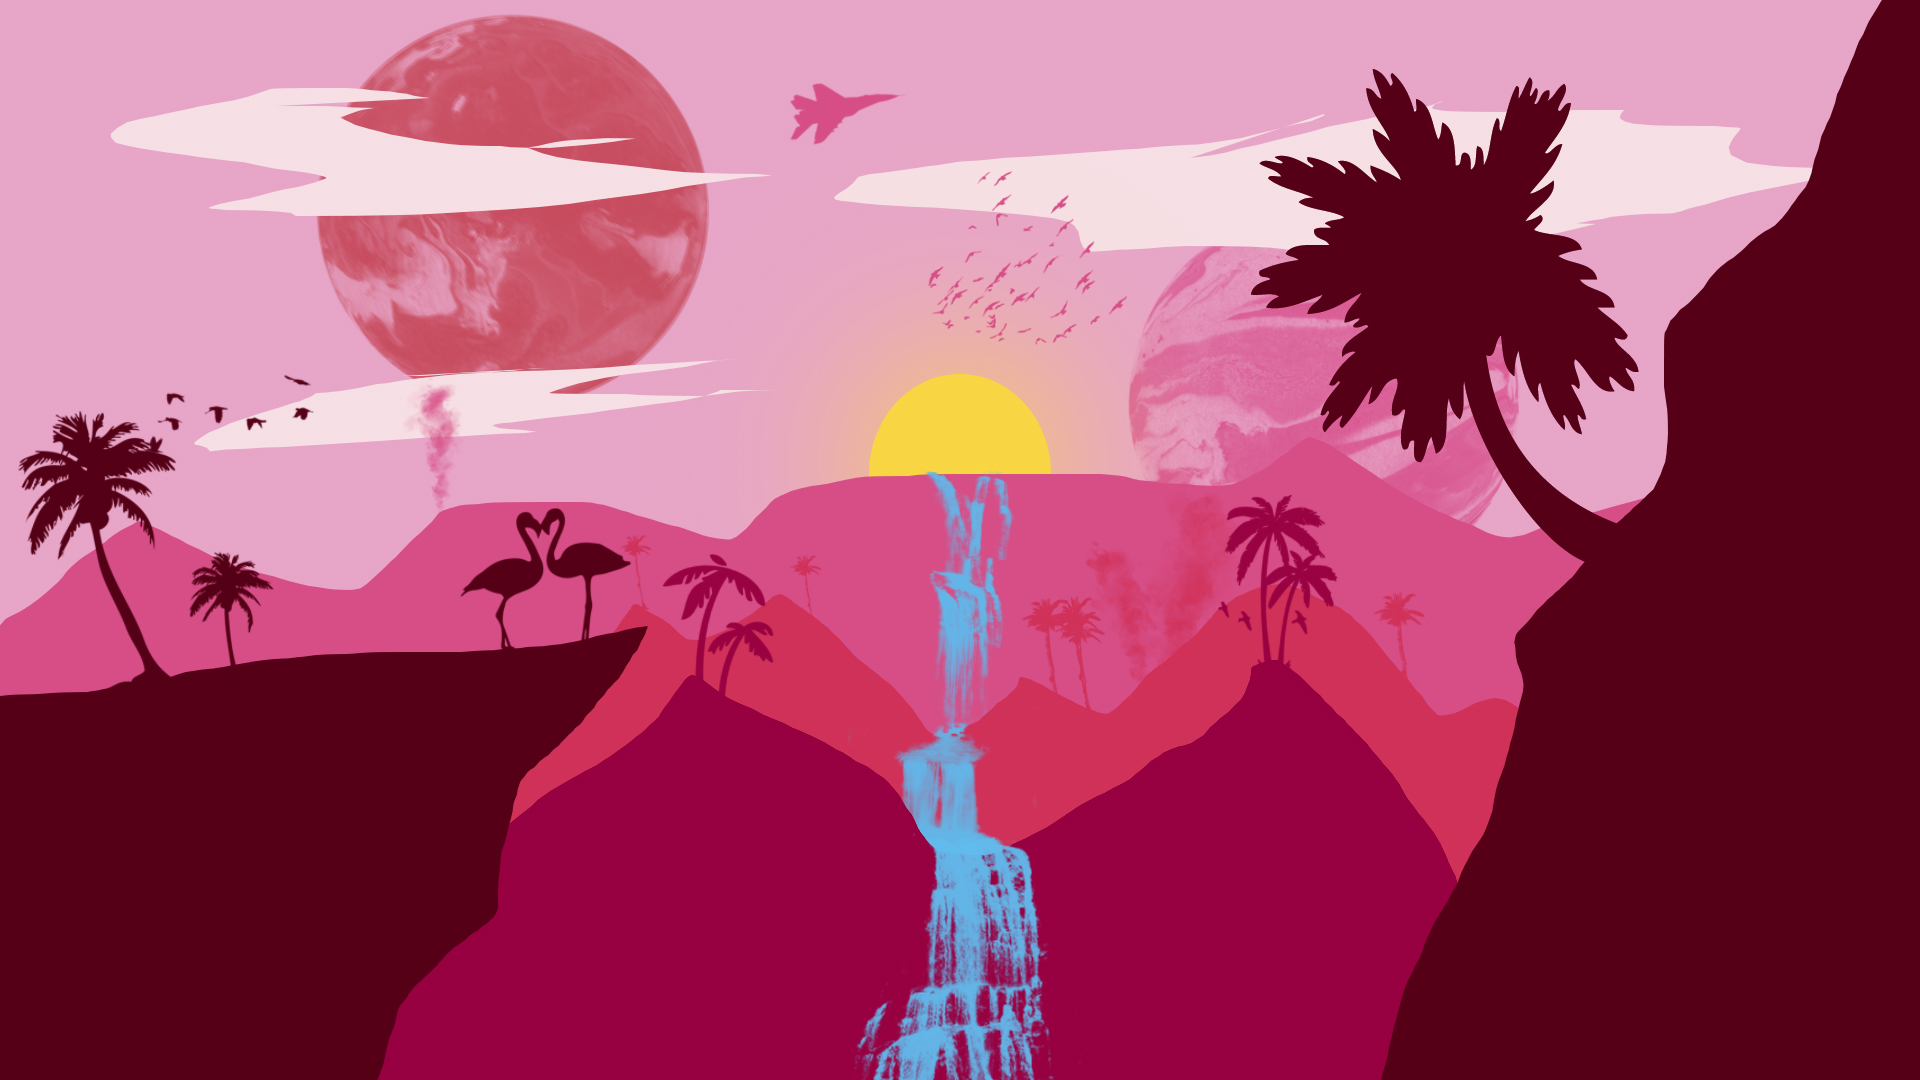 General 1920x1080 pink palm trees waterfall flamingos digital art photoshopped clouds planet birds Sun airplane mountains red